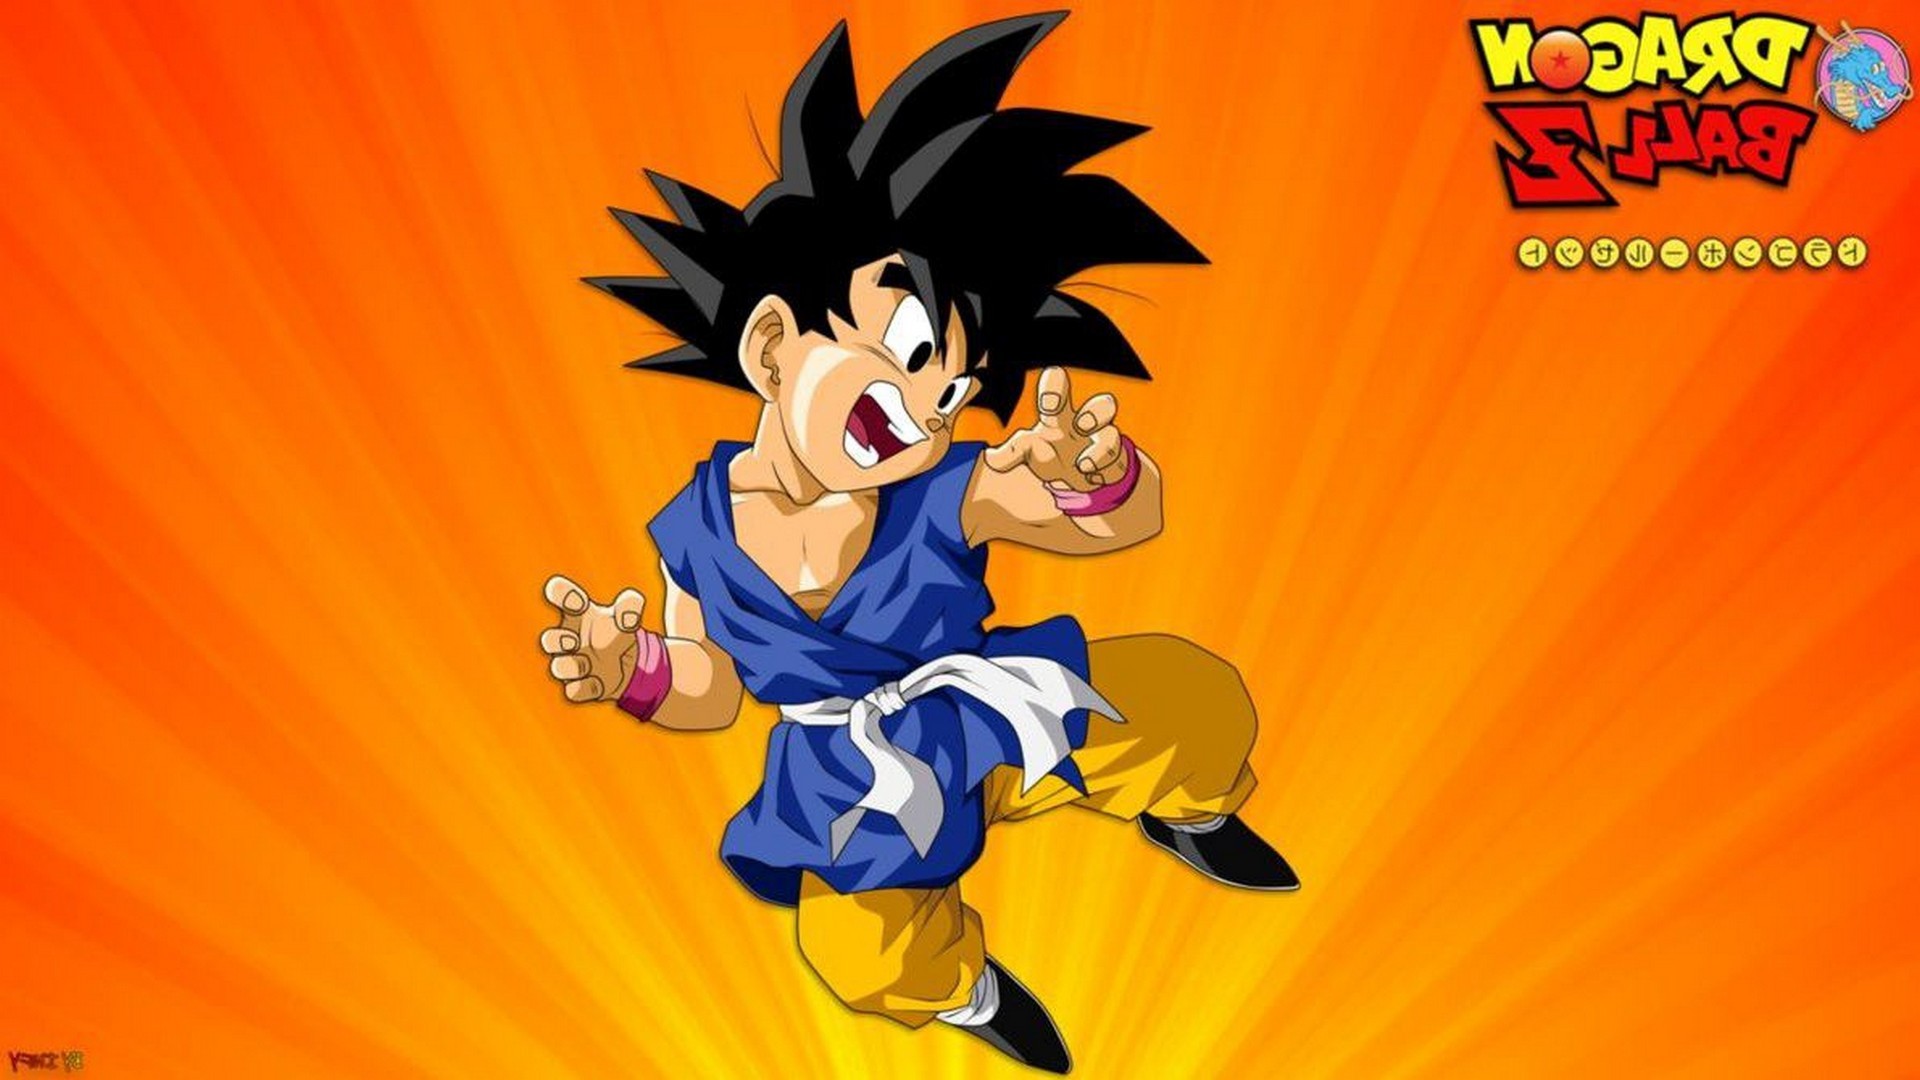 Wallpaper Kid Goku with image resolution 1920x1080 pixel. You can use this wallpaper as background for your desktop Computer Screensavers, Android or iPhone smartphones